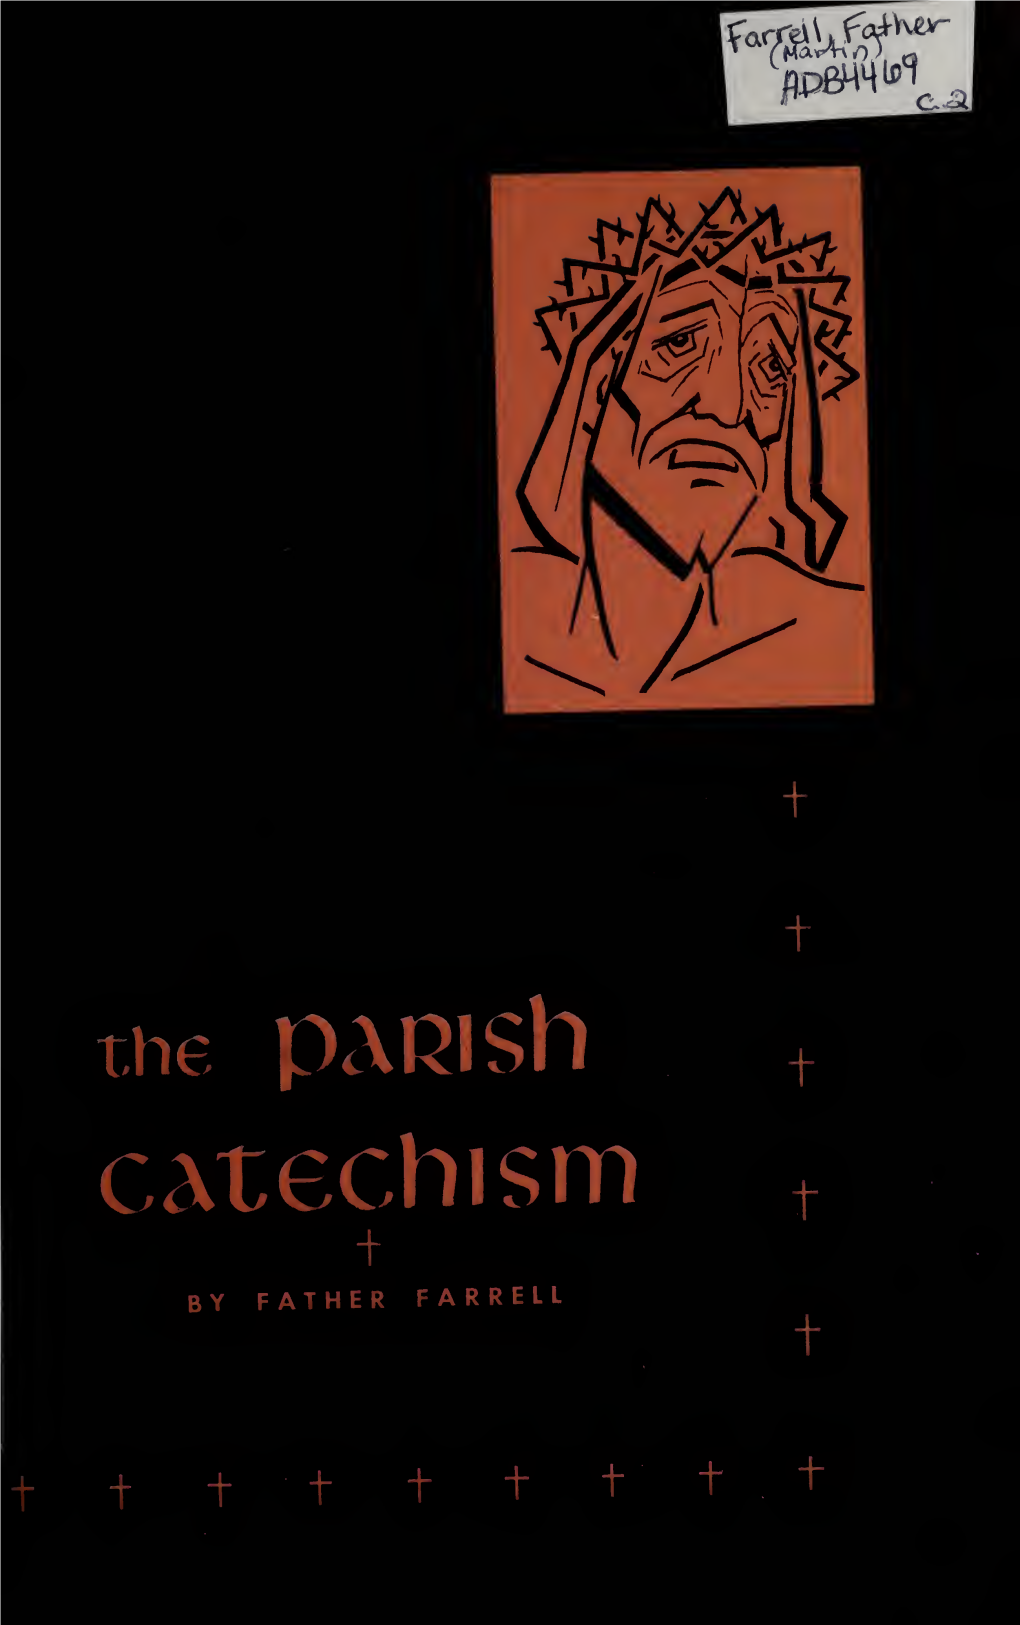 The Parish Catechism / by Father Farrell